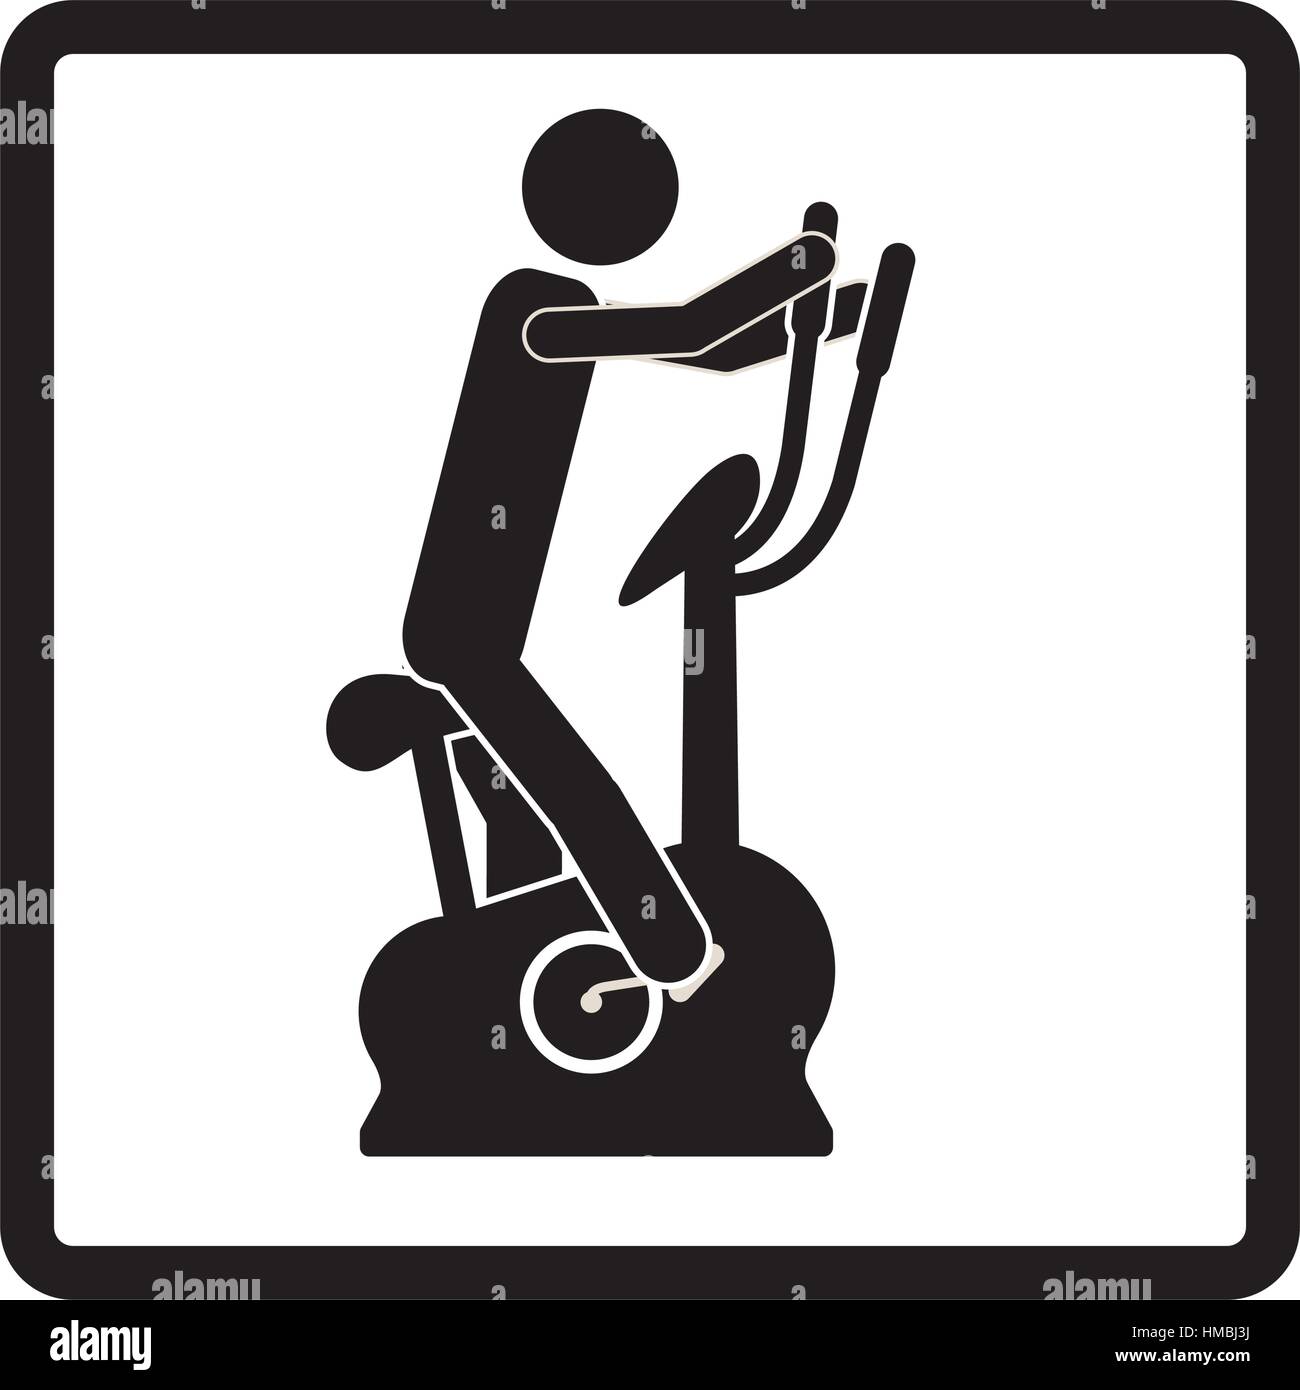 square shape pictogram with man in spinning bike vector illustration Stock Vector